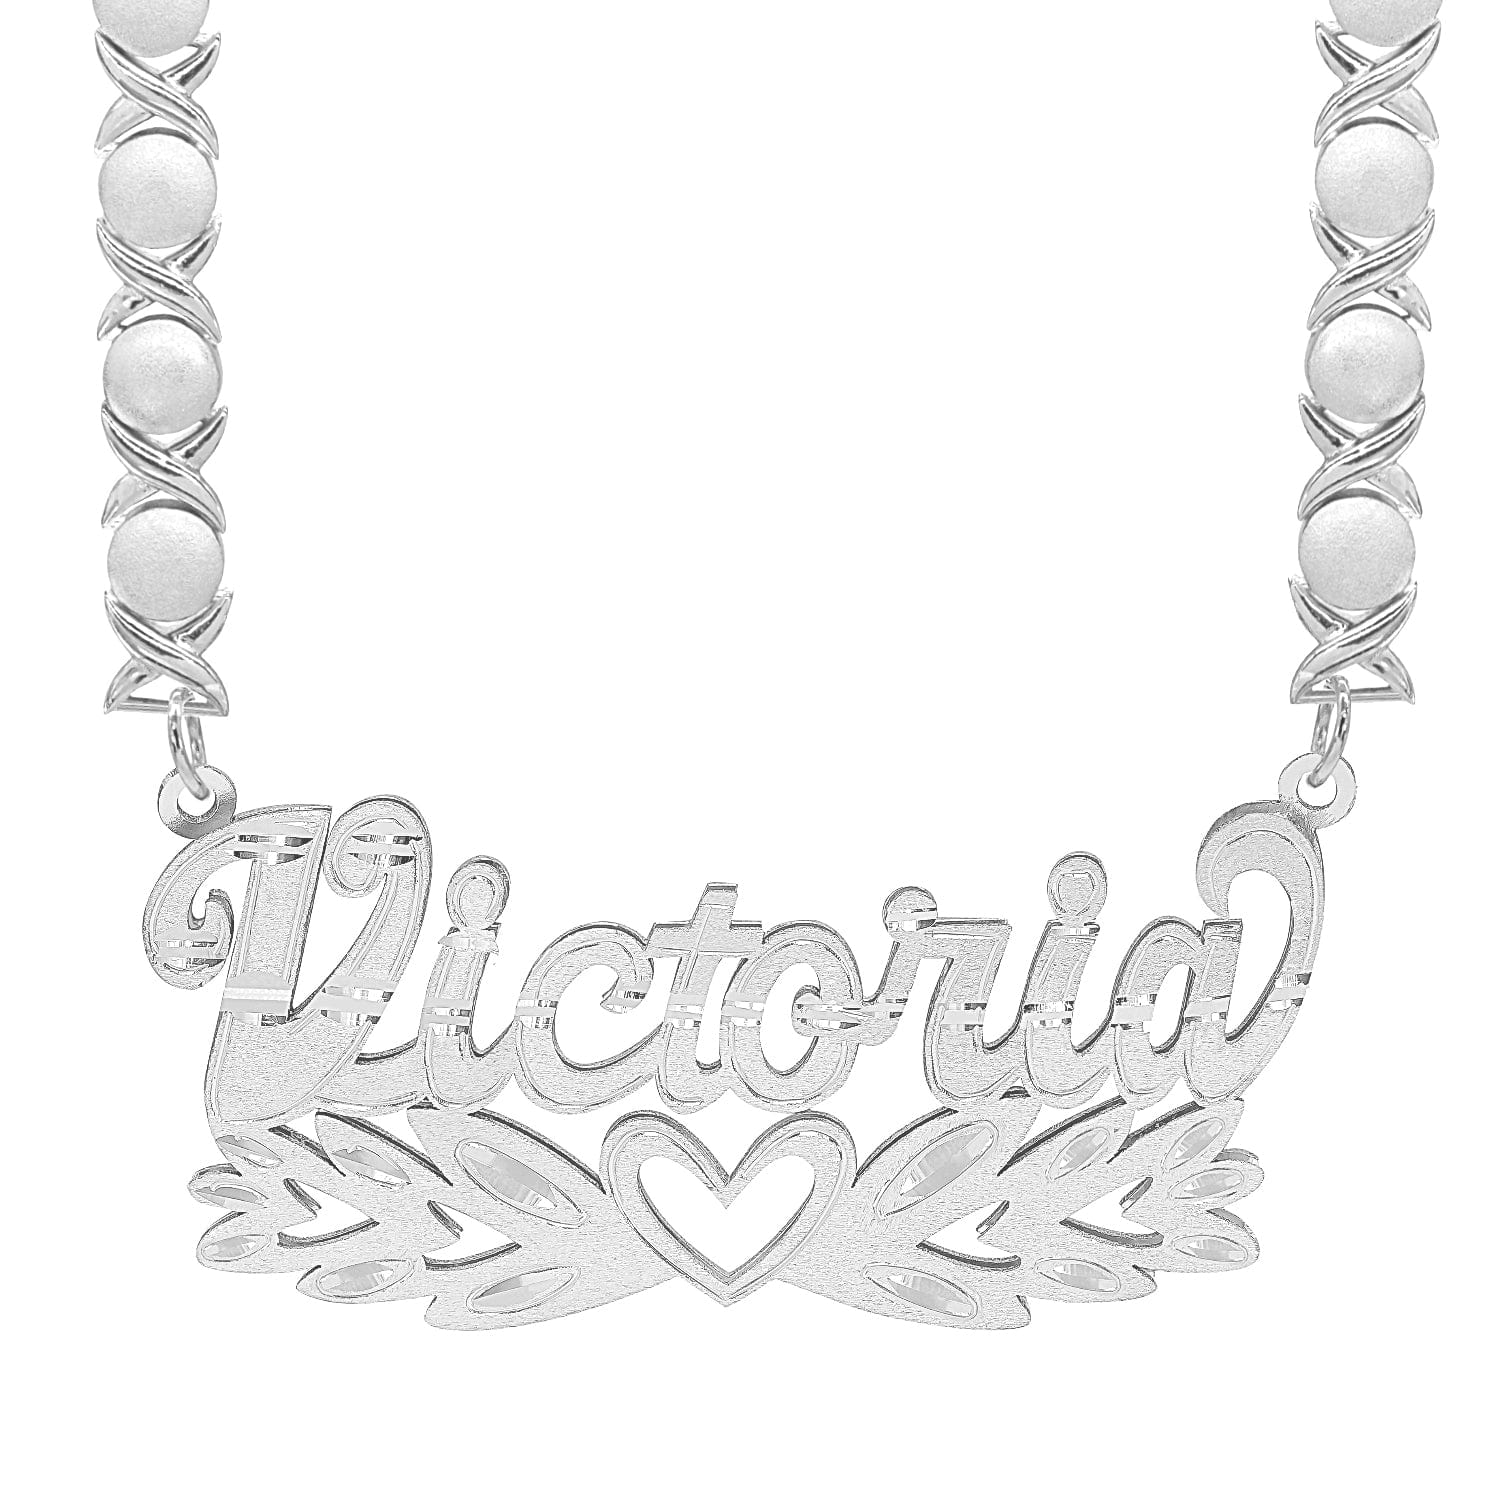 14K Gold over Sterling Silver / Rhodium Xoxo Chain Double Nameplate Necklace "Victoria" with Rhodium Xoxo Chain